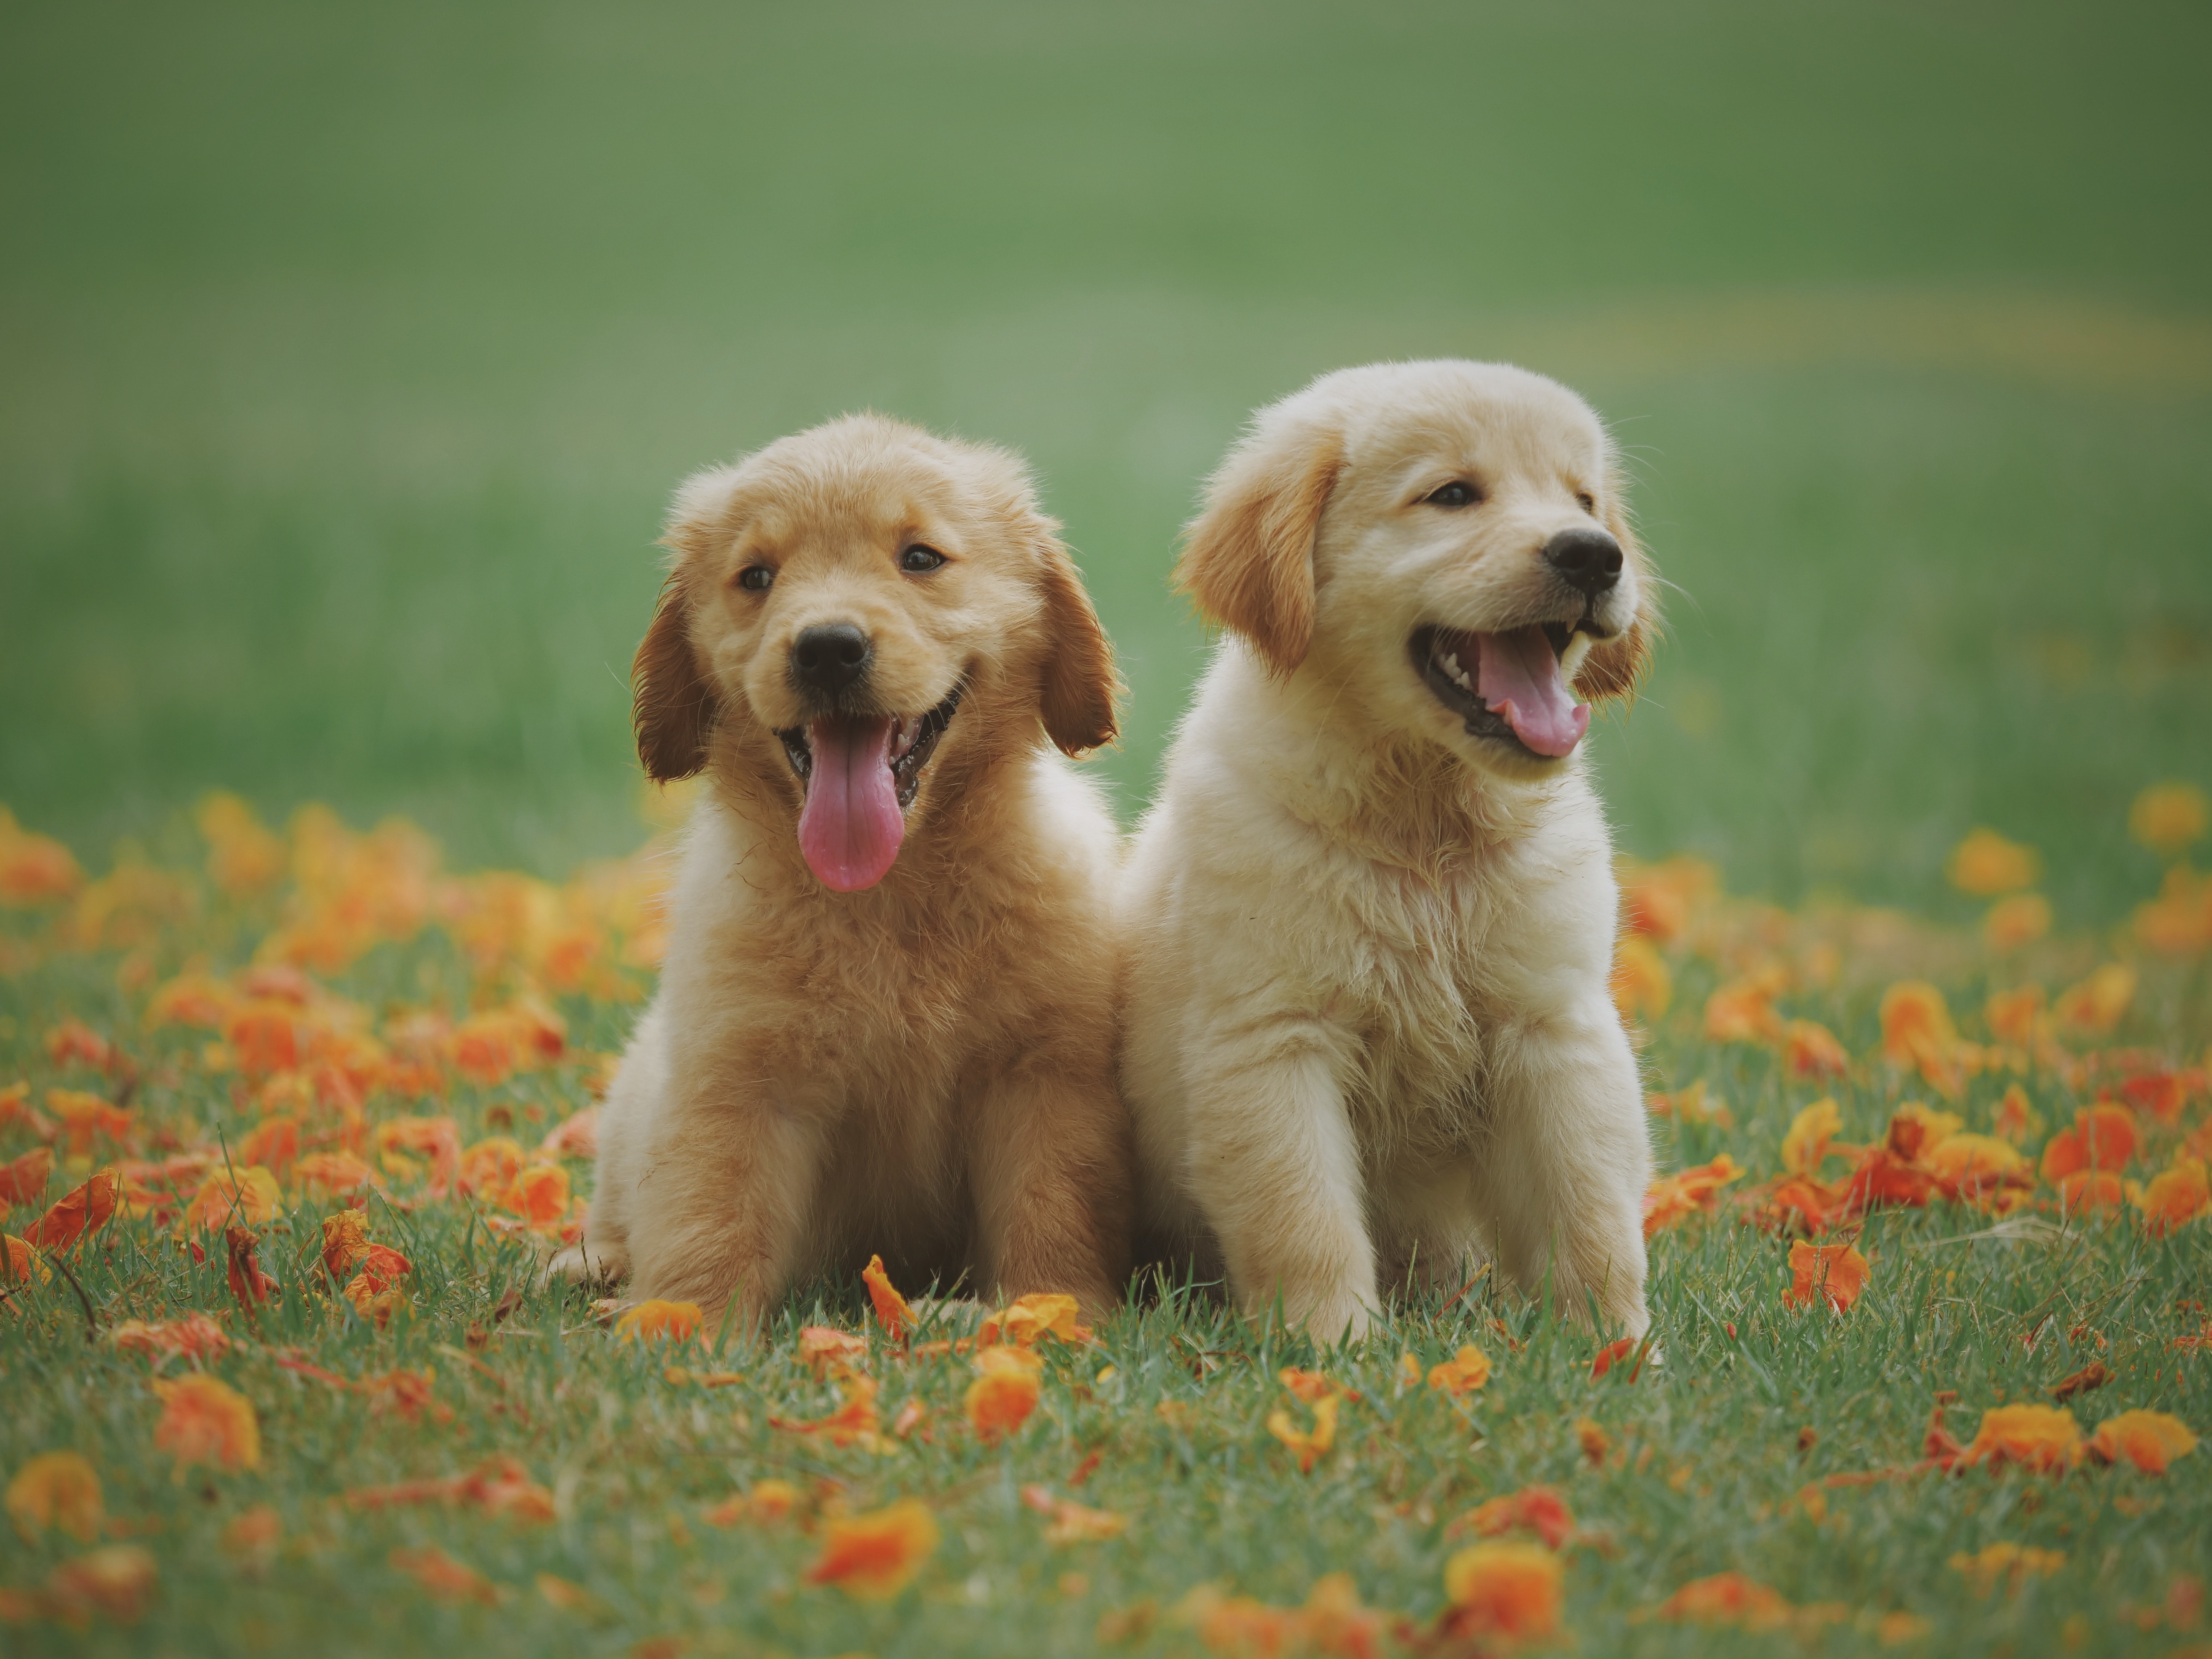 Two cute Golden Retriever puppies on the grass